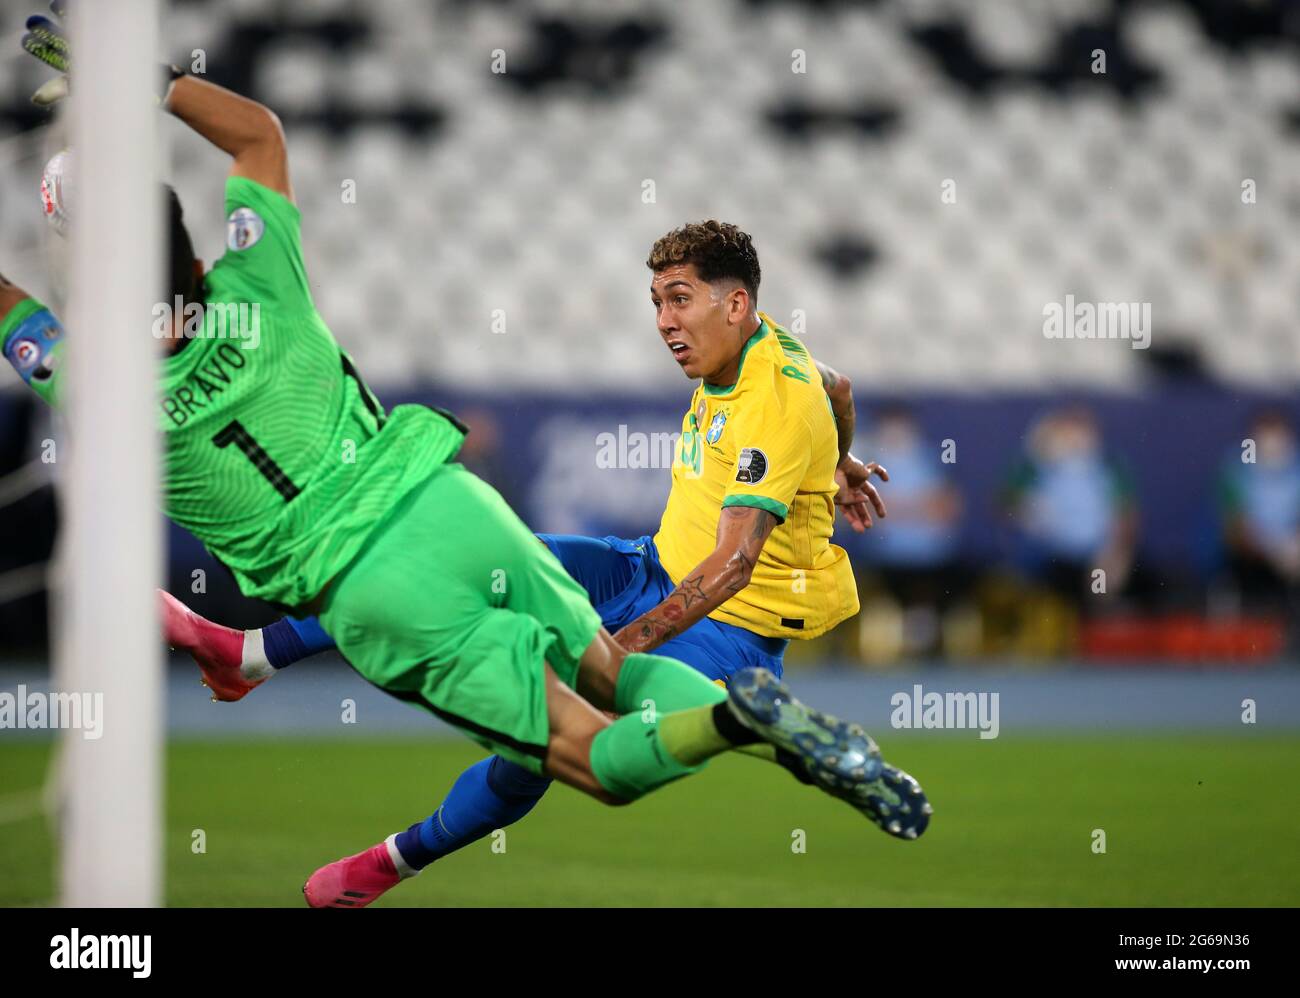 RIO DE JANEIRO, BRAZIL - JULY 02: Roberto Firmino of Brazil competes for the ball with Claudio Bravo of Chile ,during the Quarterfinal match between Brazil and Chile as part of Conmebol Copa America Brazil 2021 at Estadio Olímpico Nilton Santos on July 2, 2021 in Rio de Janeiro, Brazil. (MB Media) Stock Photo